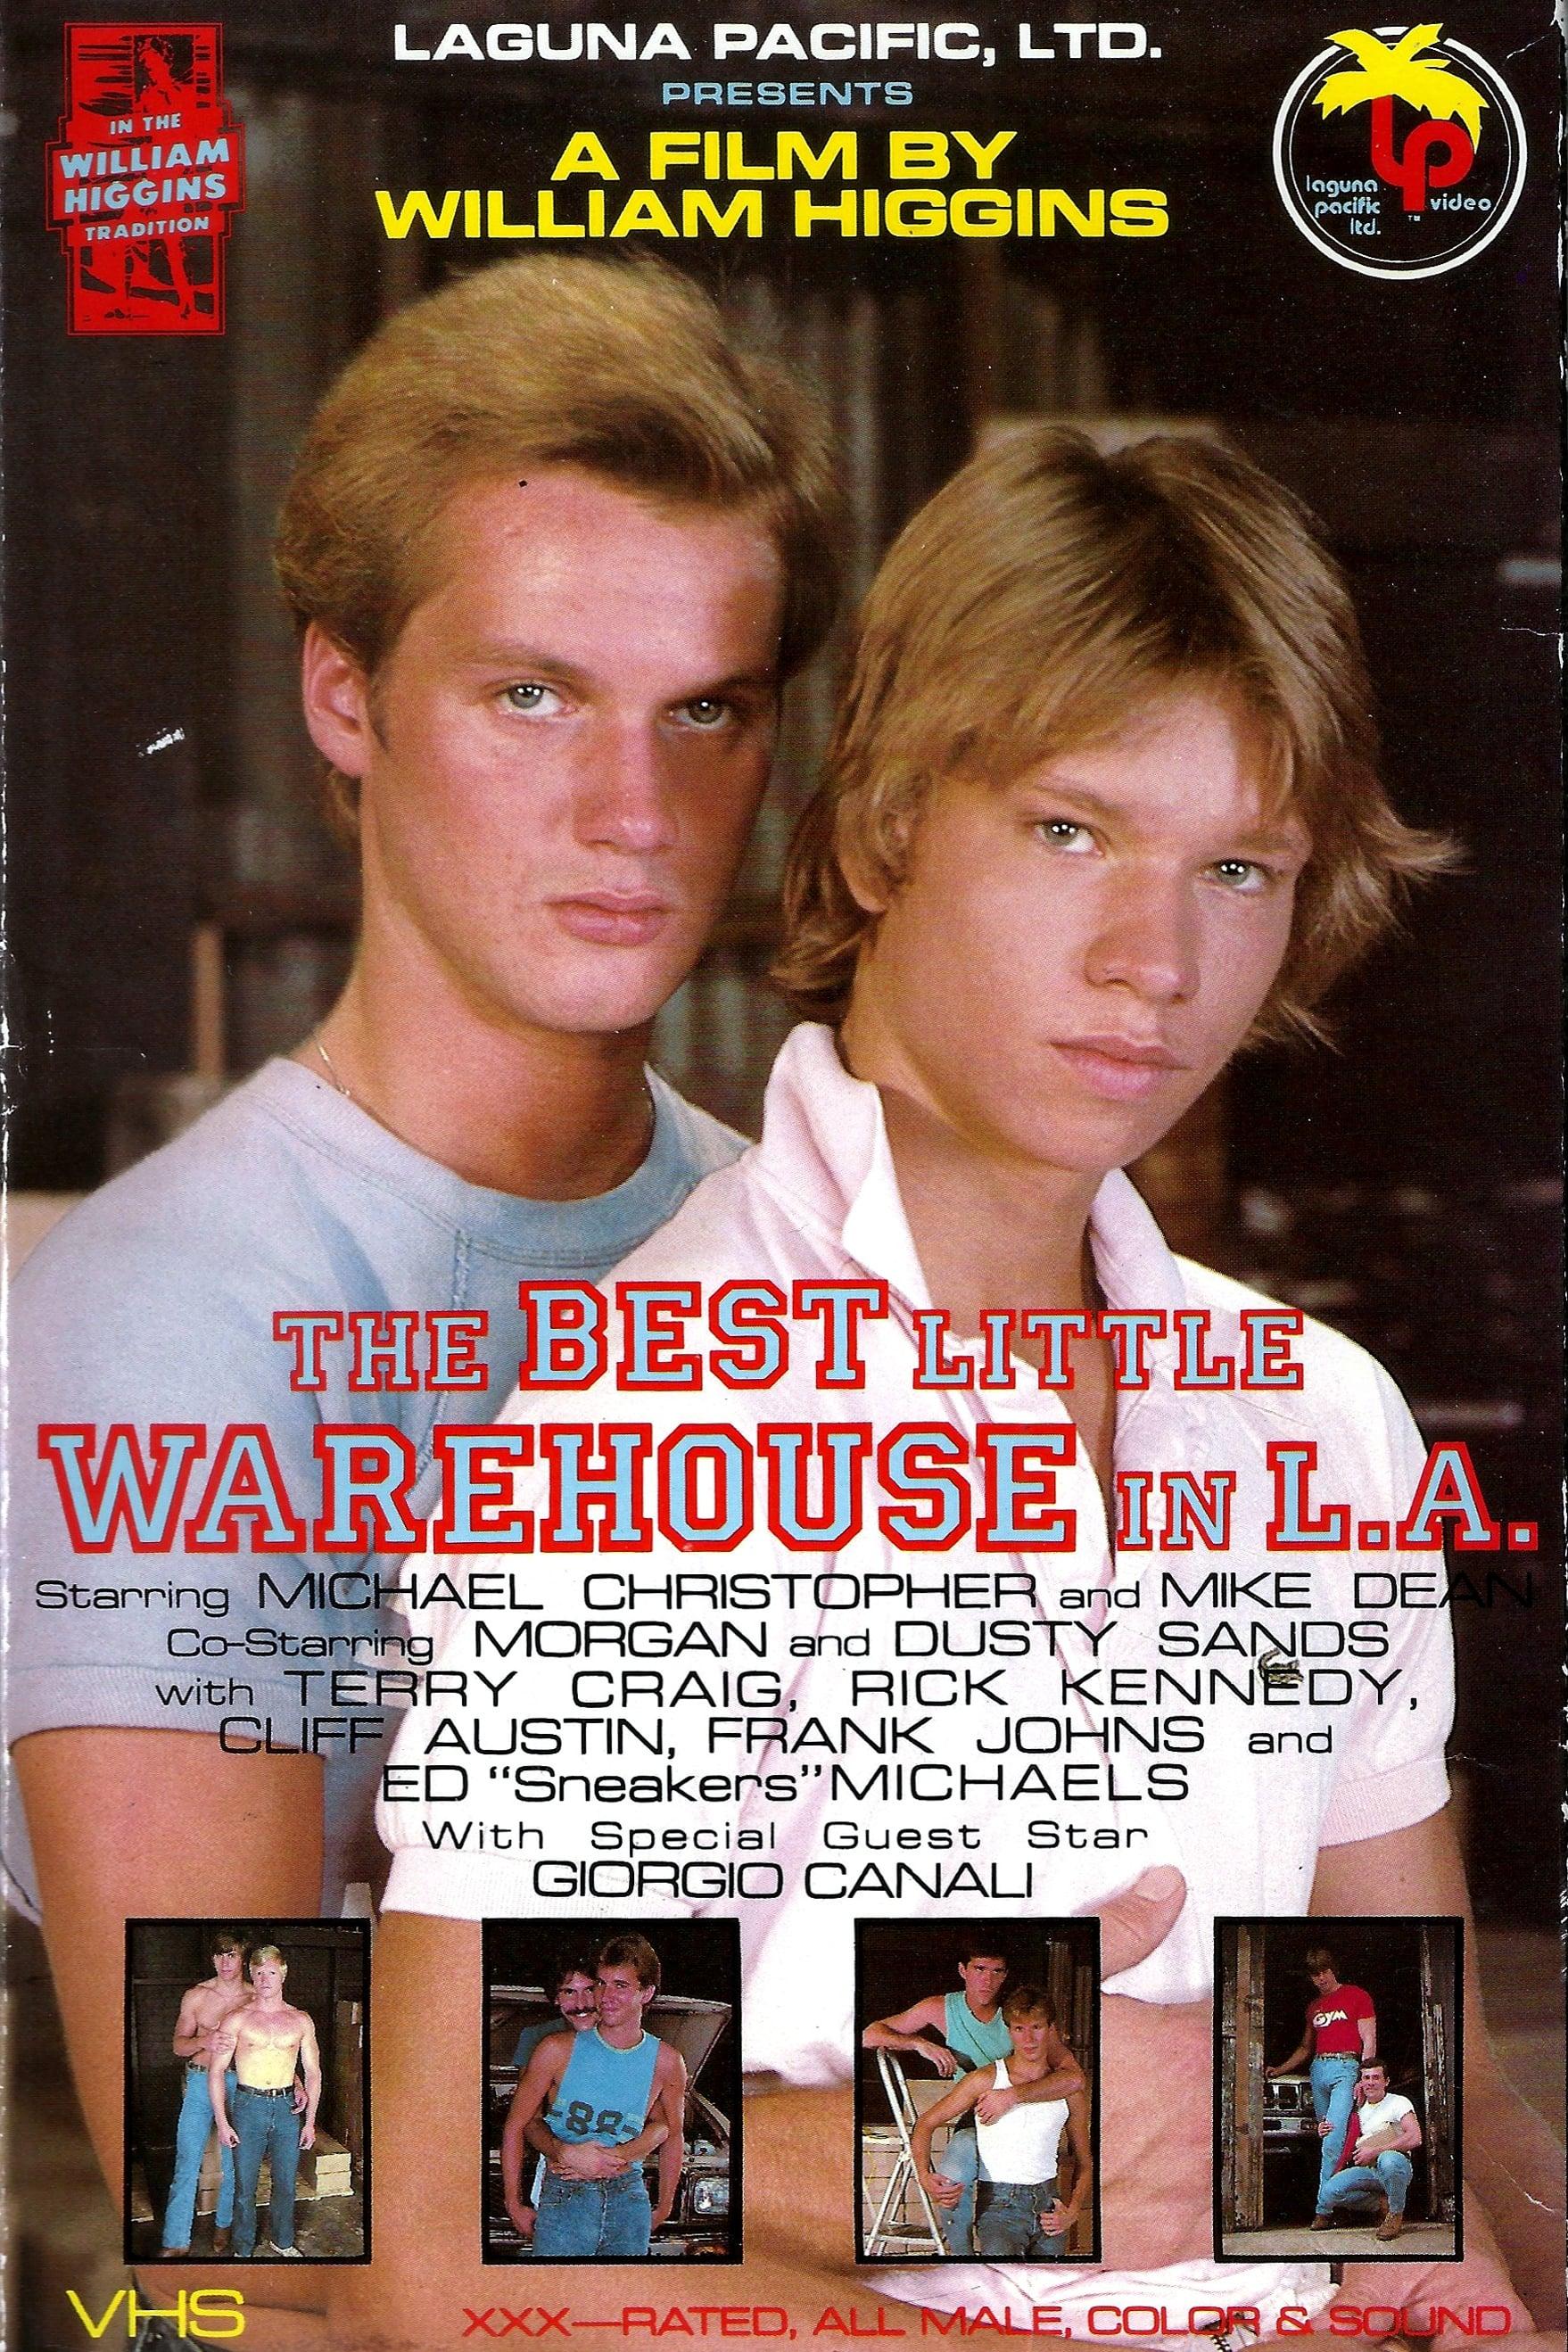 The Best Little Warehouse In L.A. poster